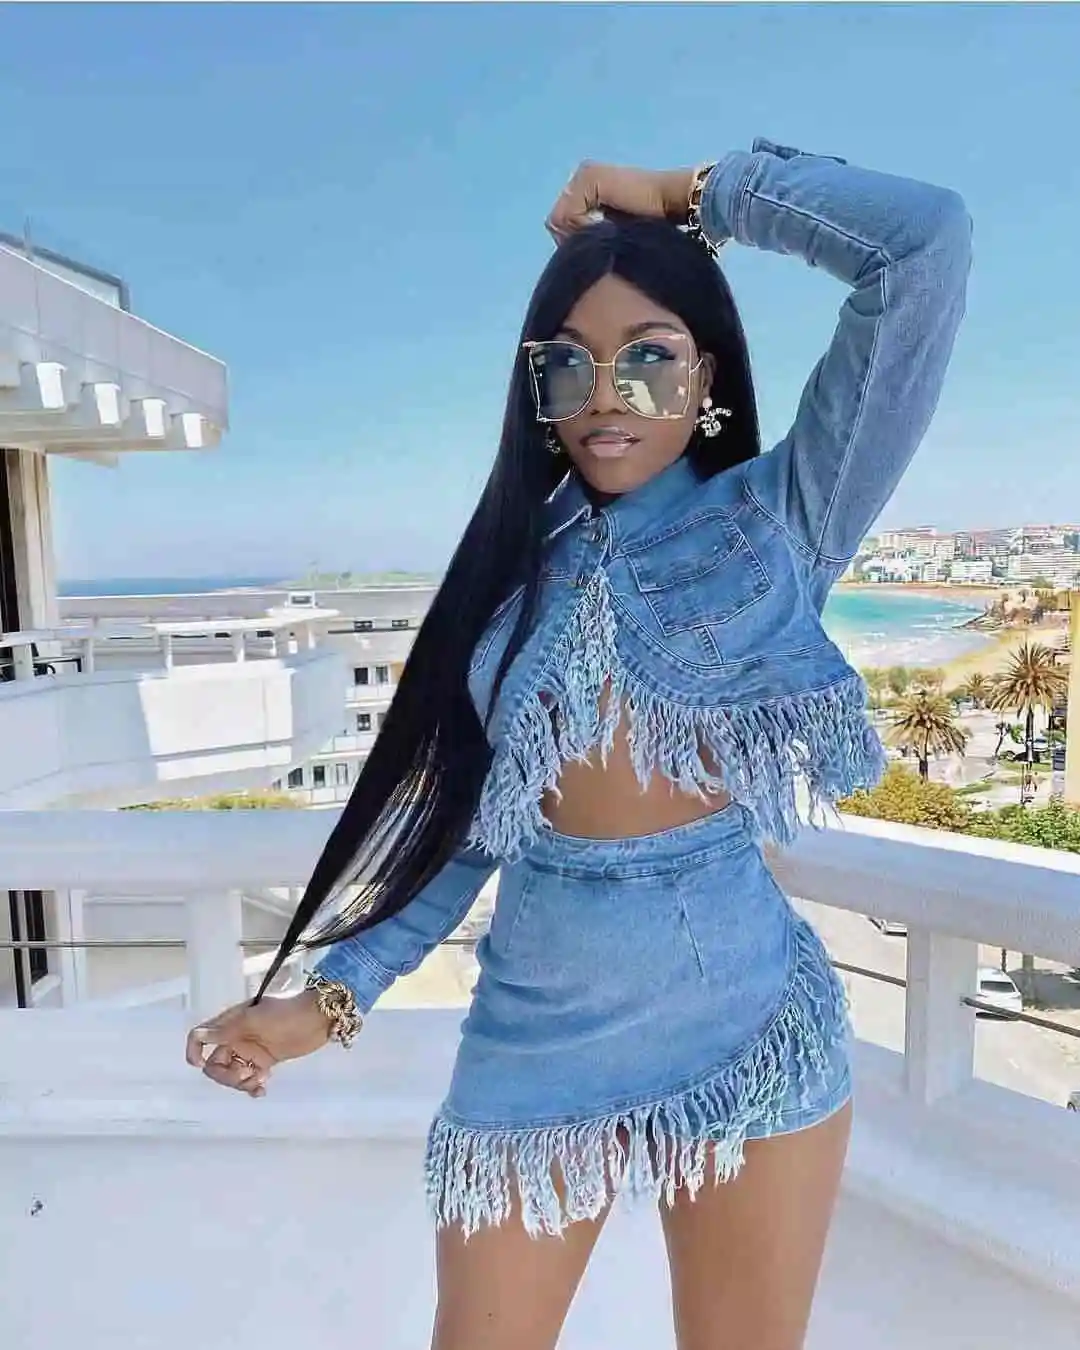 

Spring 2021 quality fashionable denim blue 2 pieces skirt set with tassels women jean jacket mini dress suits sexy streetwear, 1 color as picture